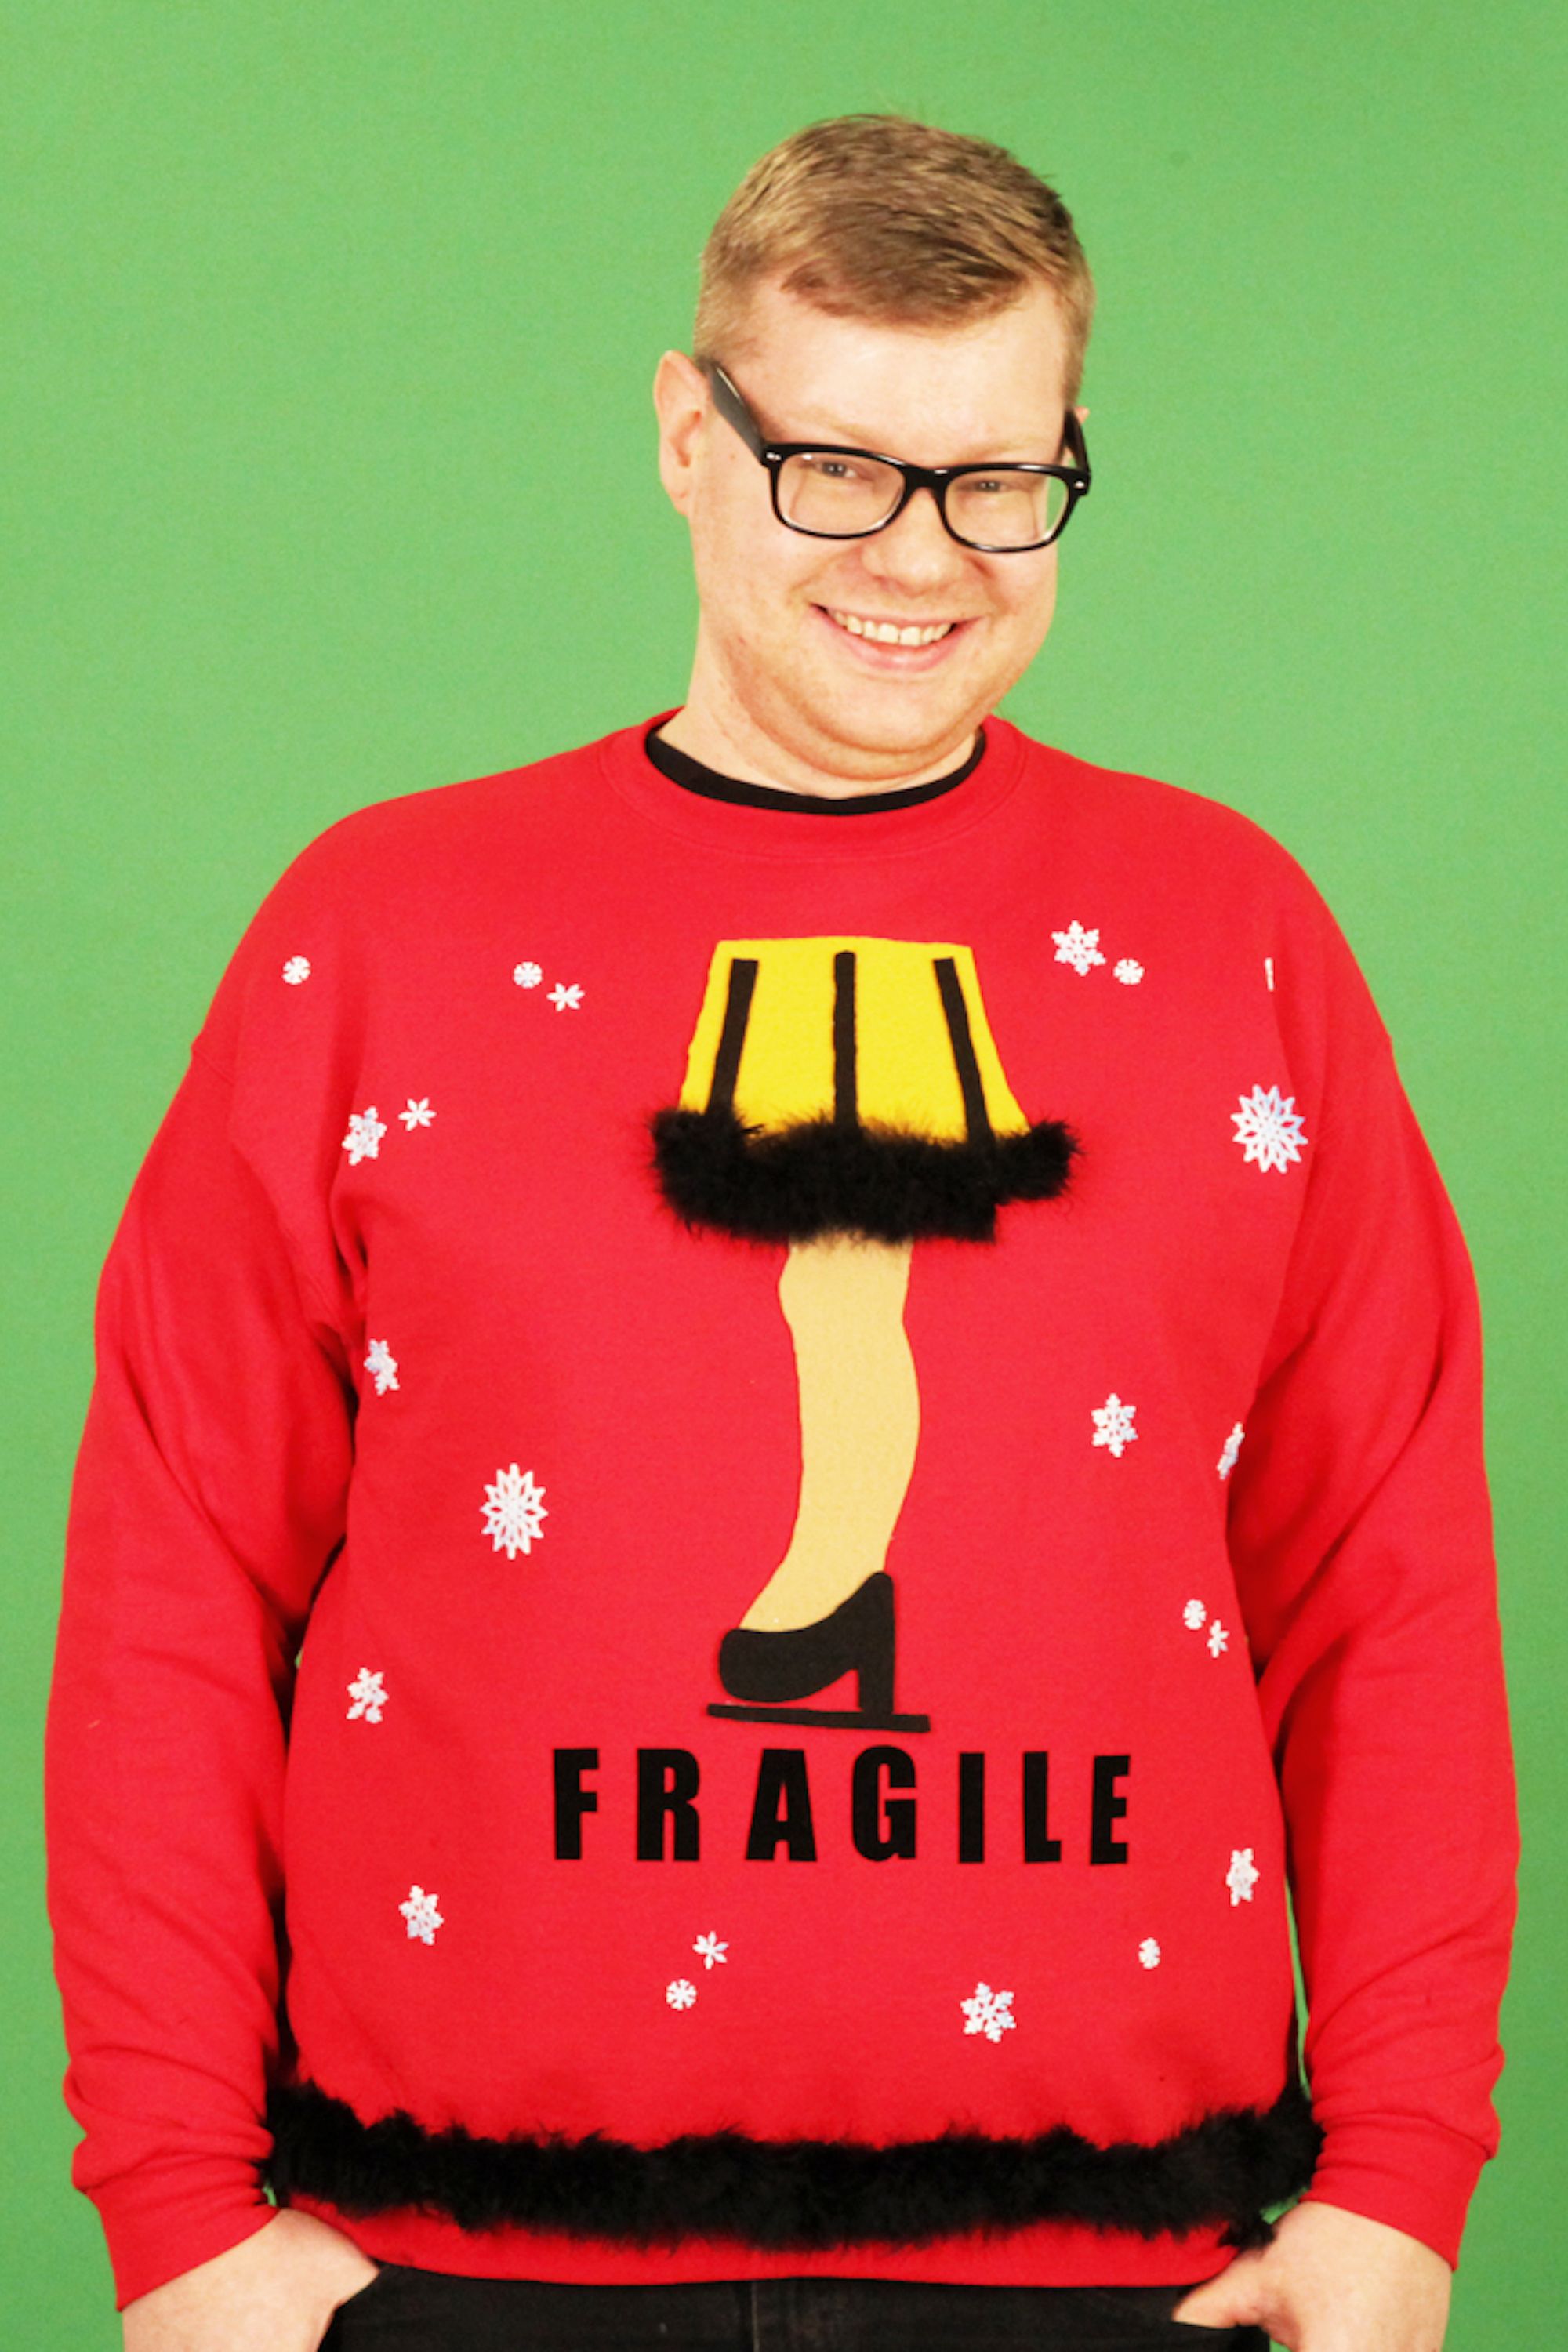 Today's Everyday Fashion: Candy Cane Ugly Christmas Sweater DIY